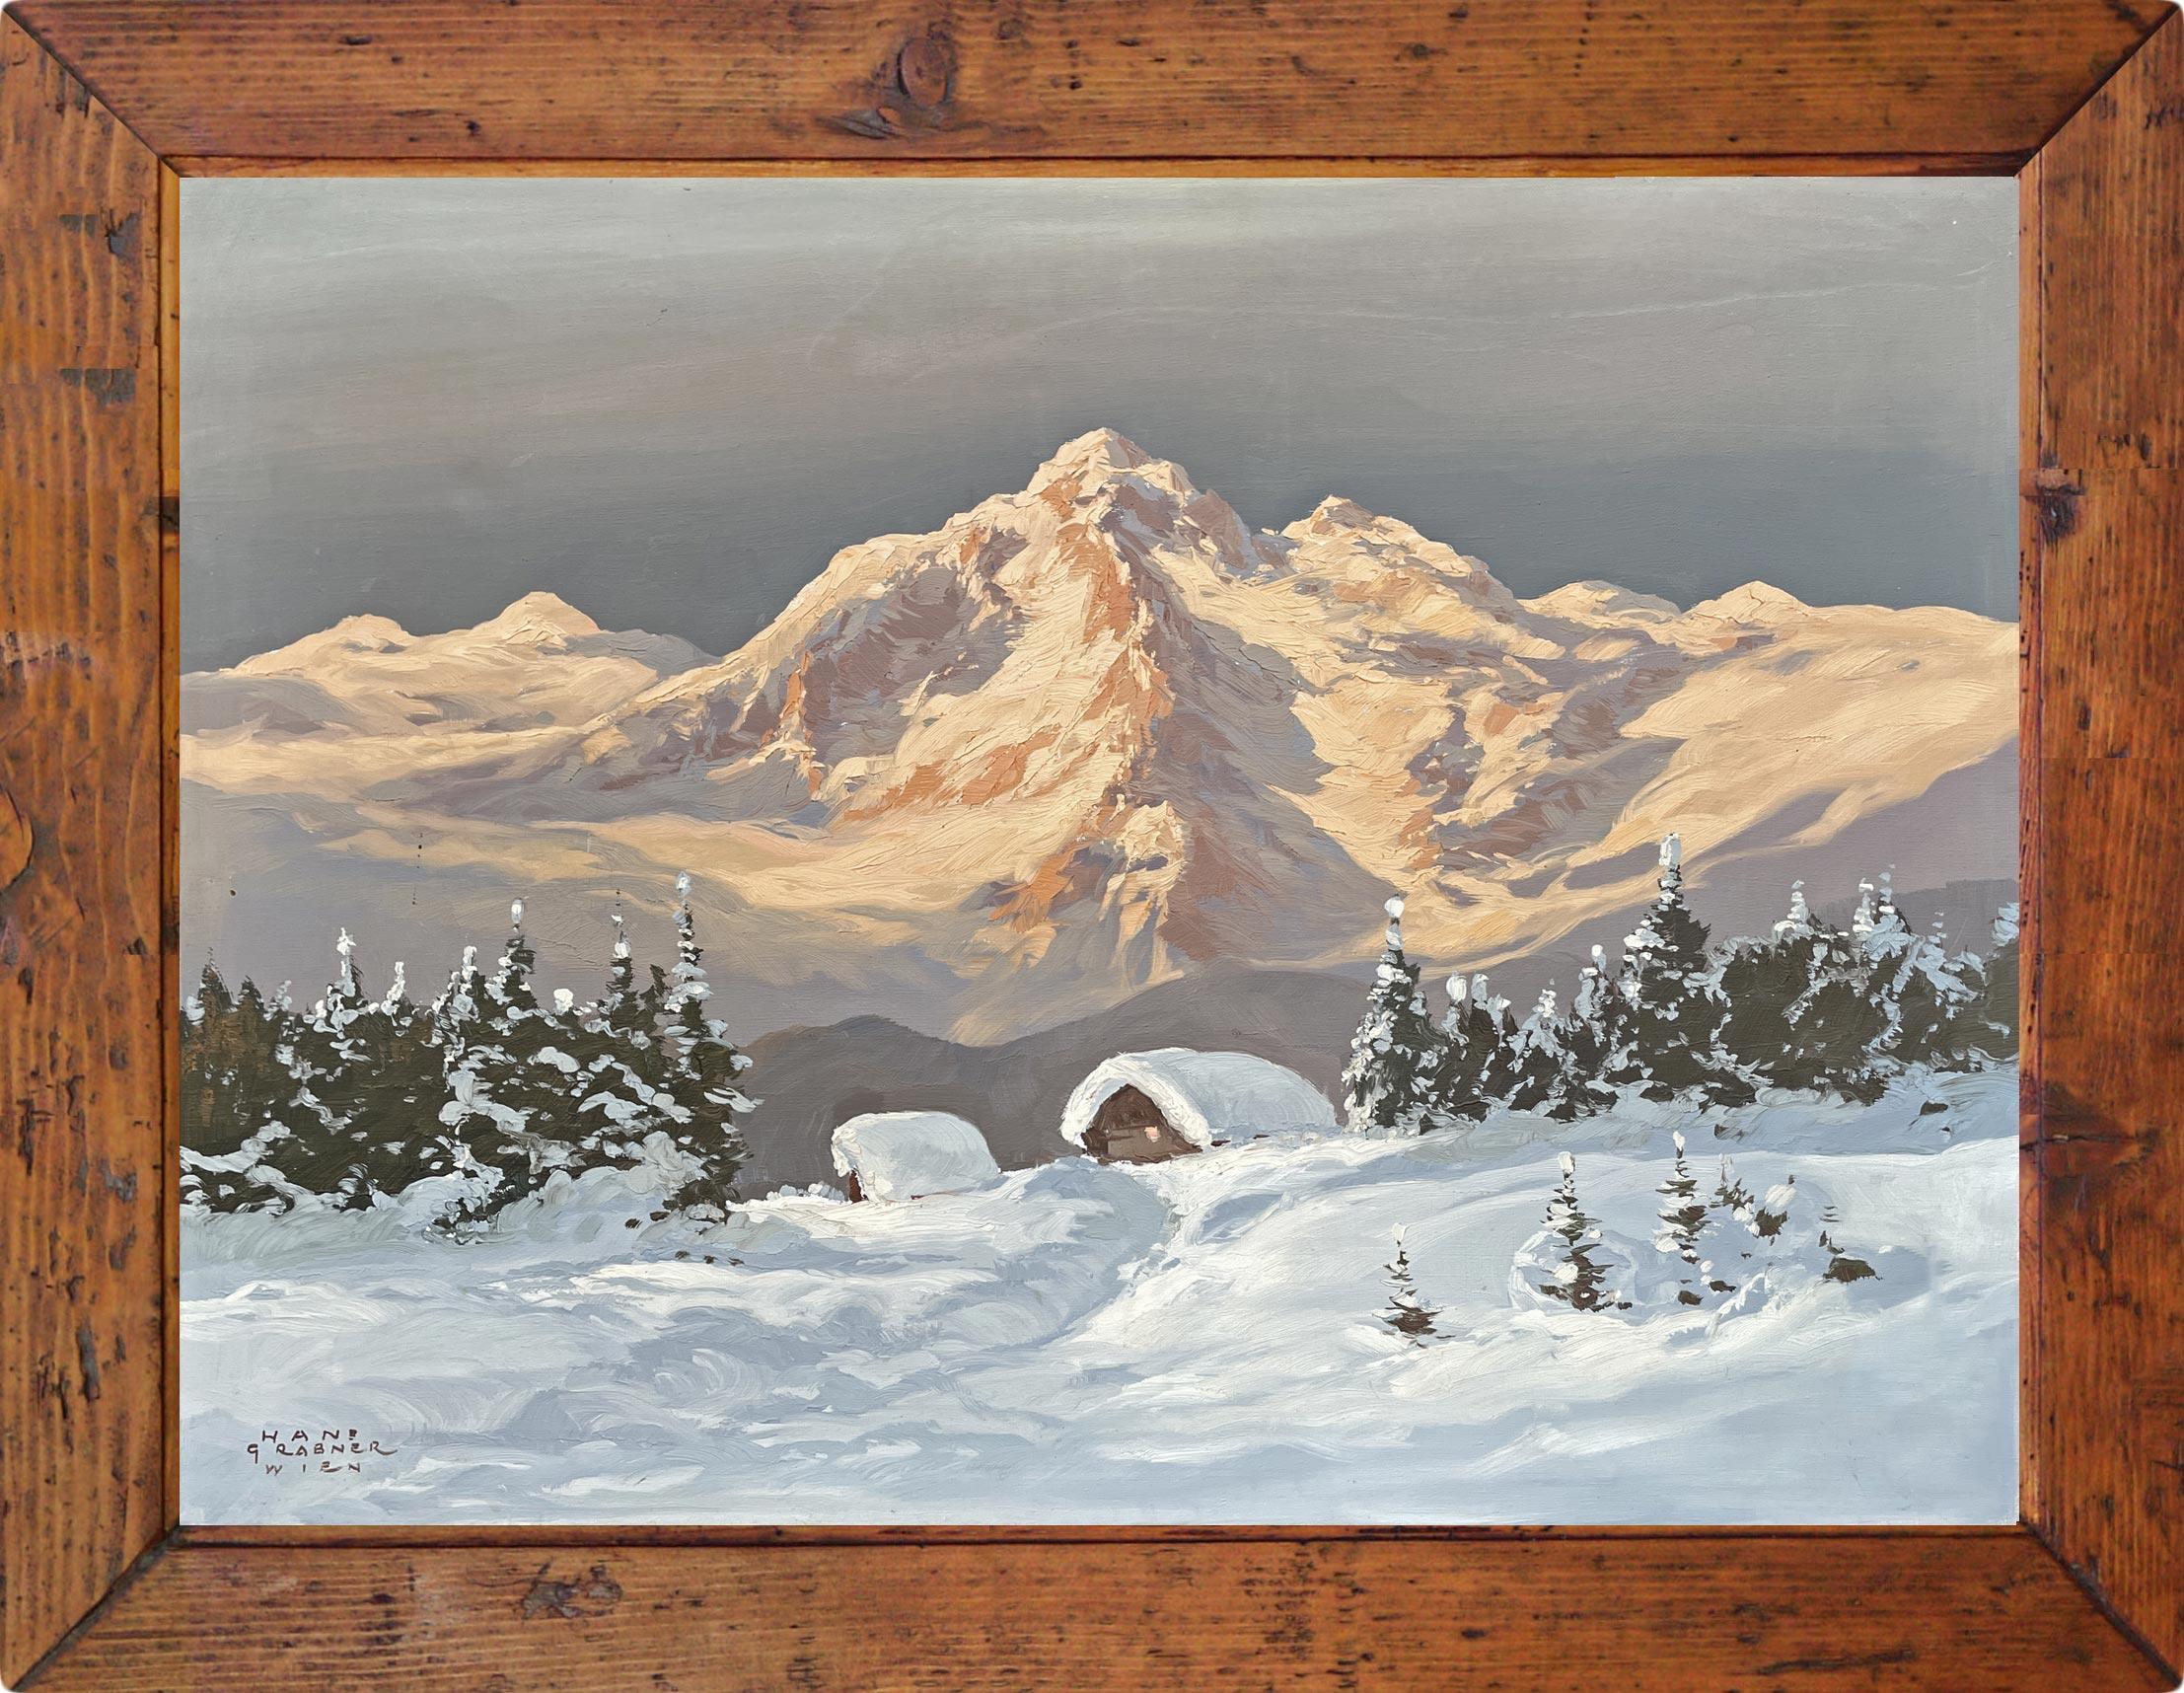 Hans Grabner – snowy landscape at twilight.

Measures: 60 x 80 cm (dimensions referring to the painting only)
75 x 955 (dimensions including the antique fir frame)
Oil on canvas - around 1950

The sun is about to set, leaving only the rocky